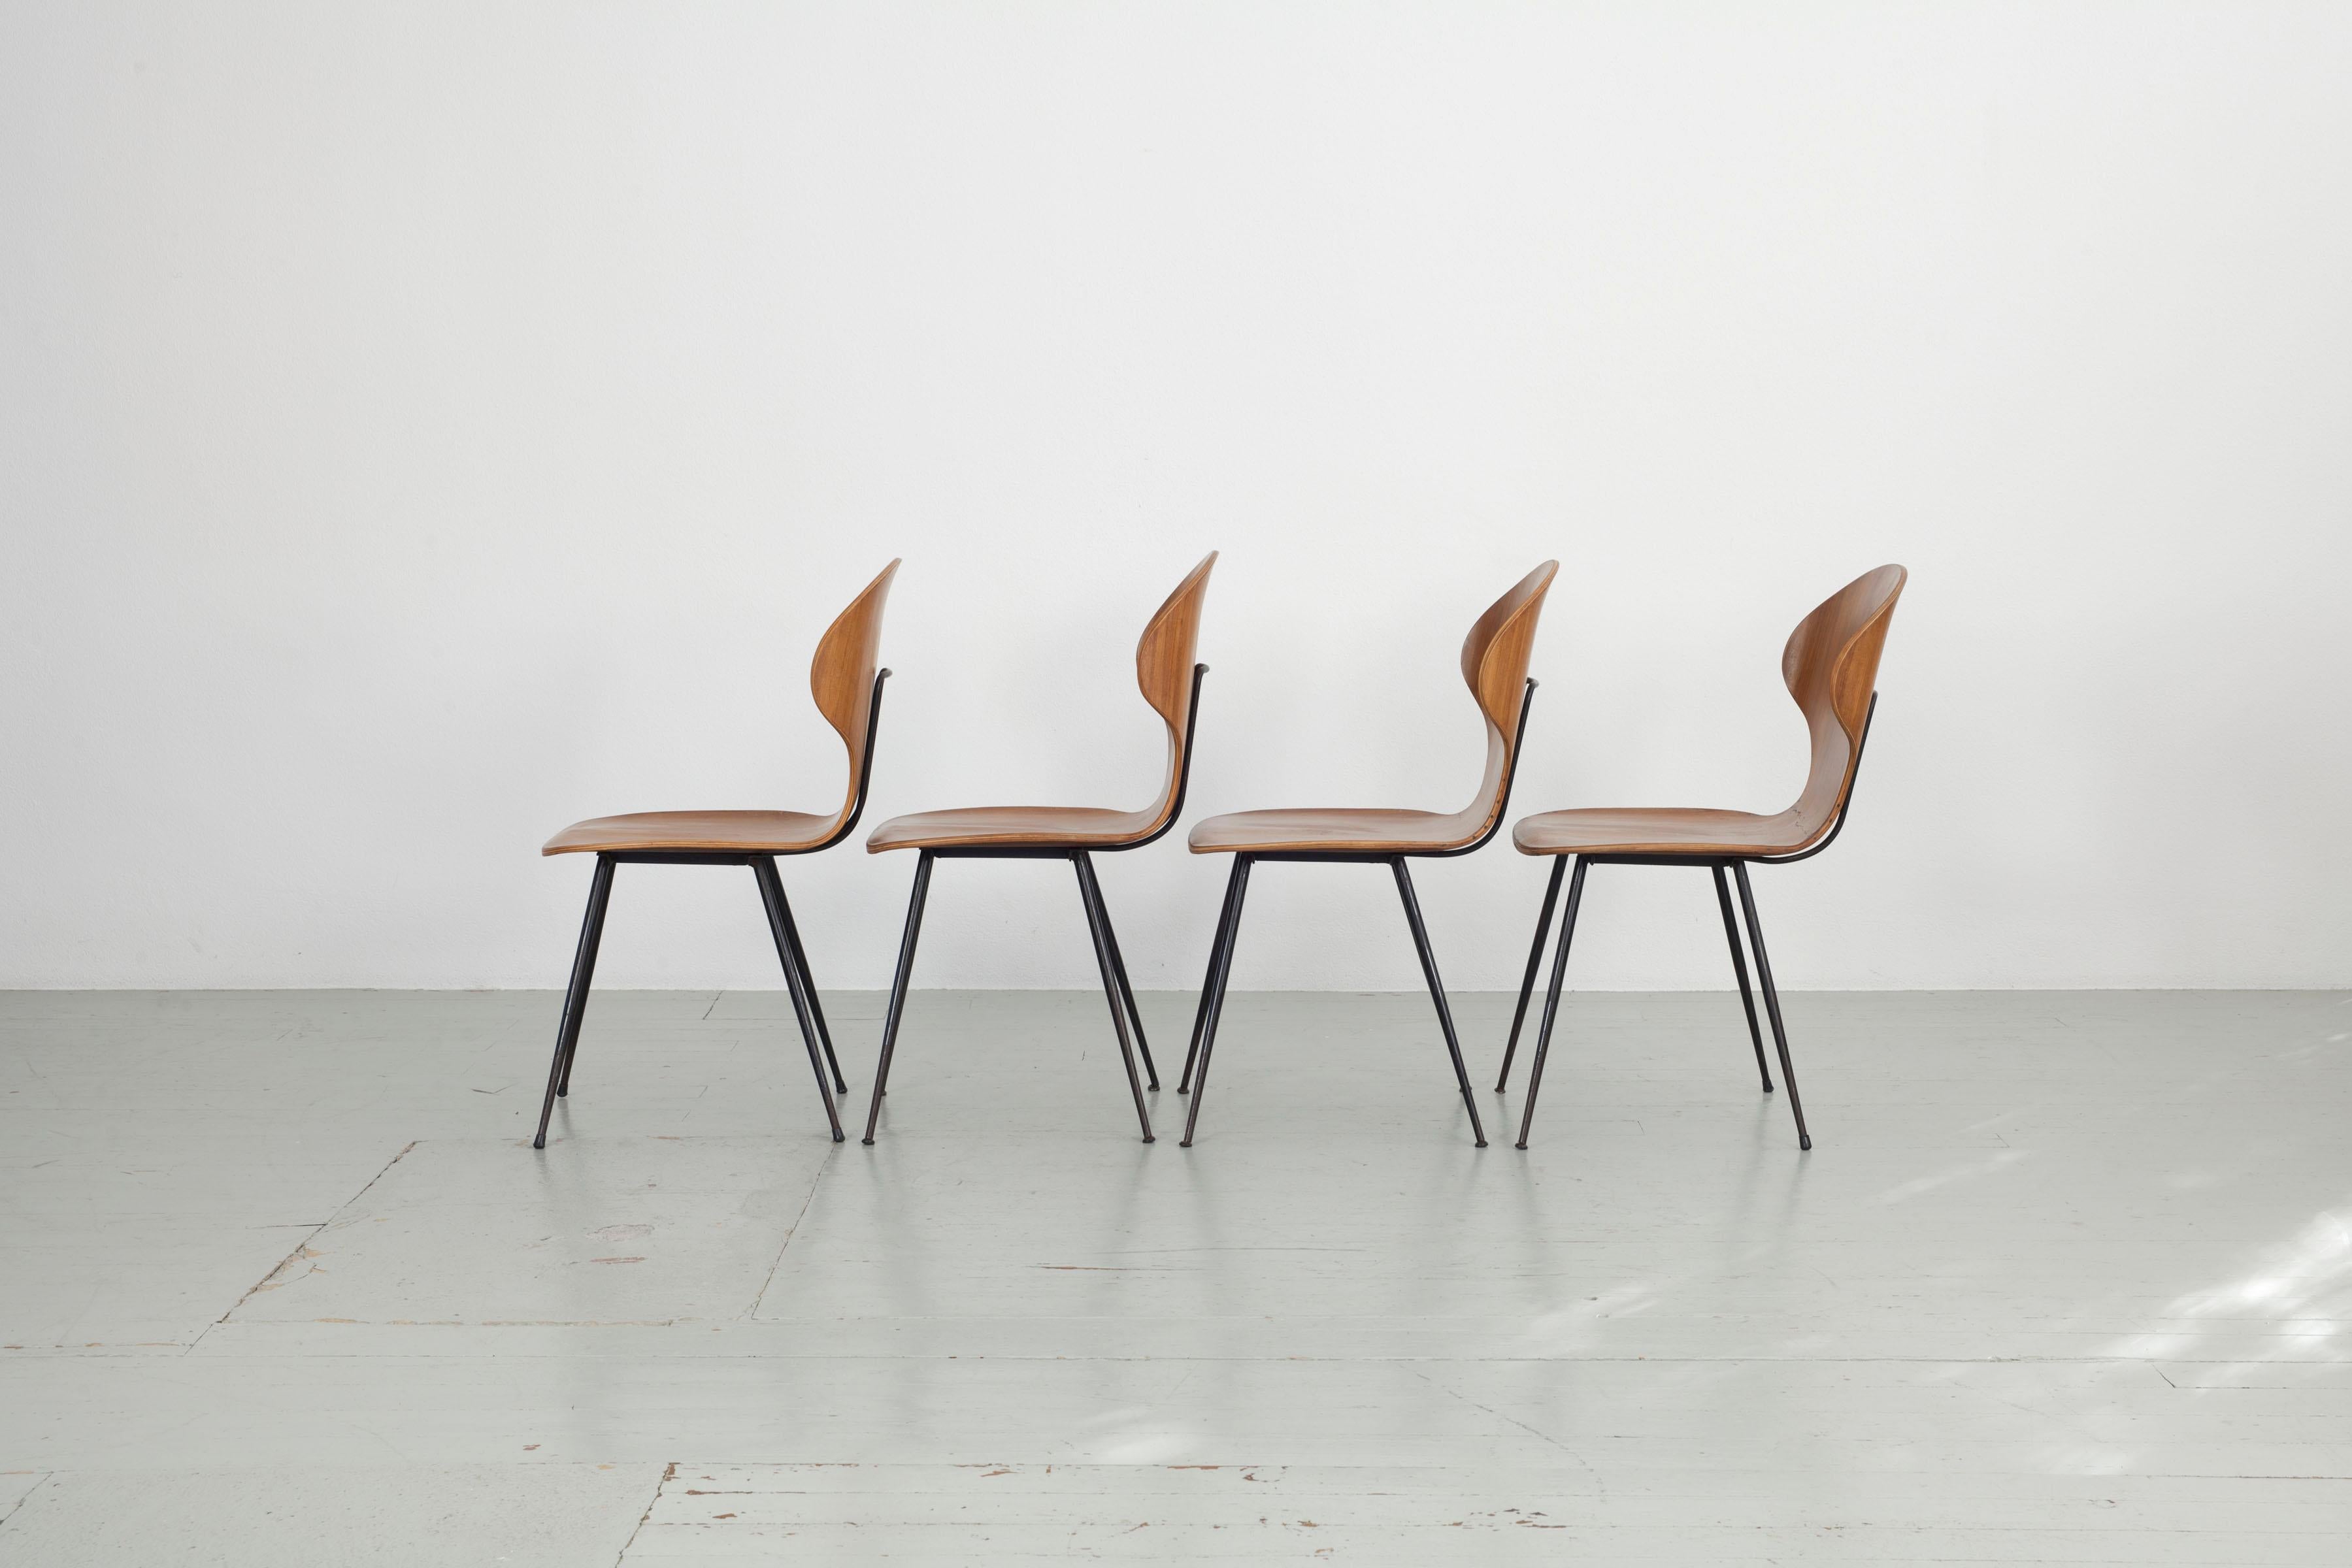 Metal Set of 4 Bentwood chairs by Carlo Ratti, Industria Legni Curvati, Italy  1950s. For Sale